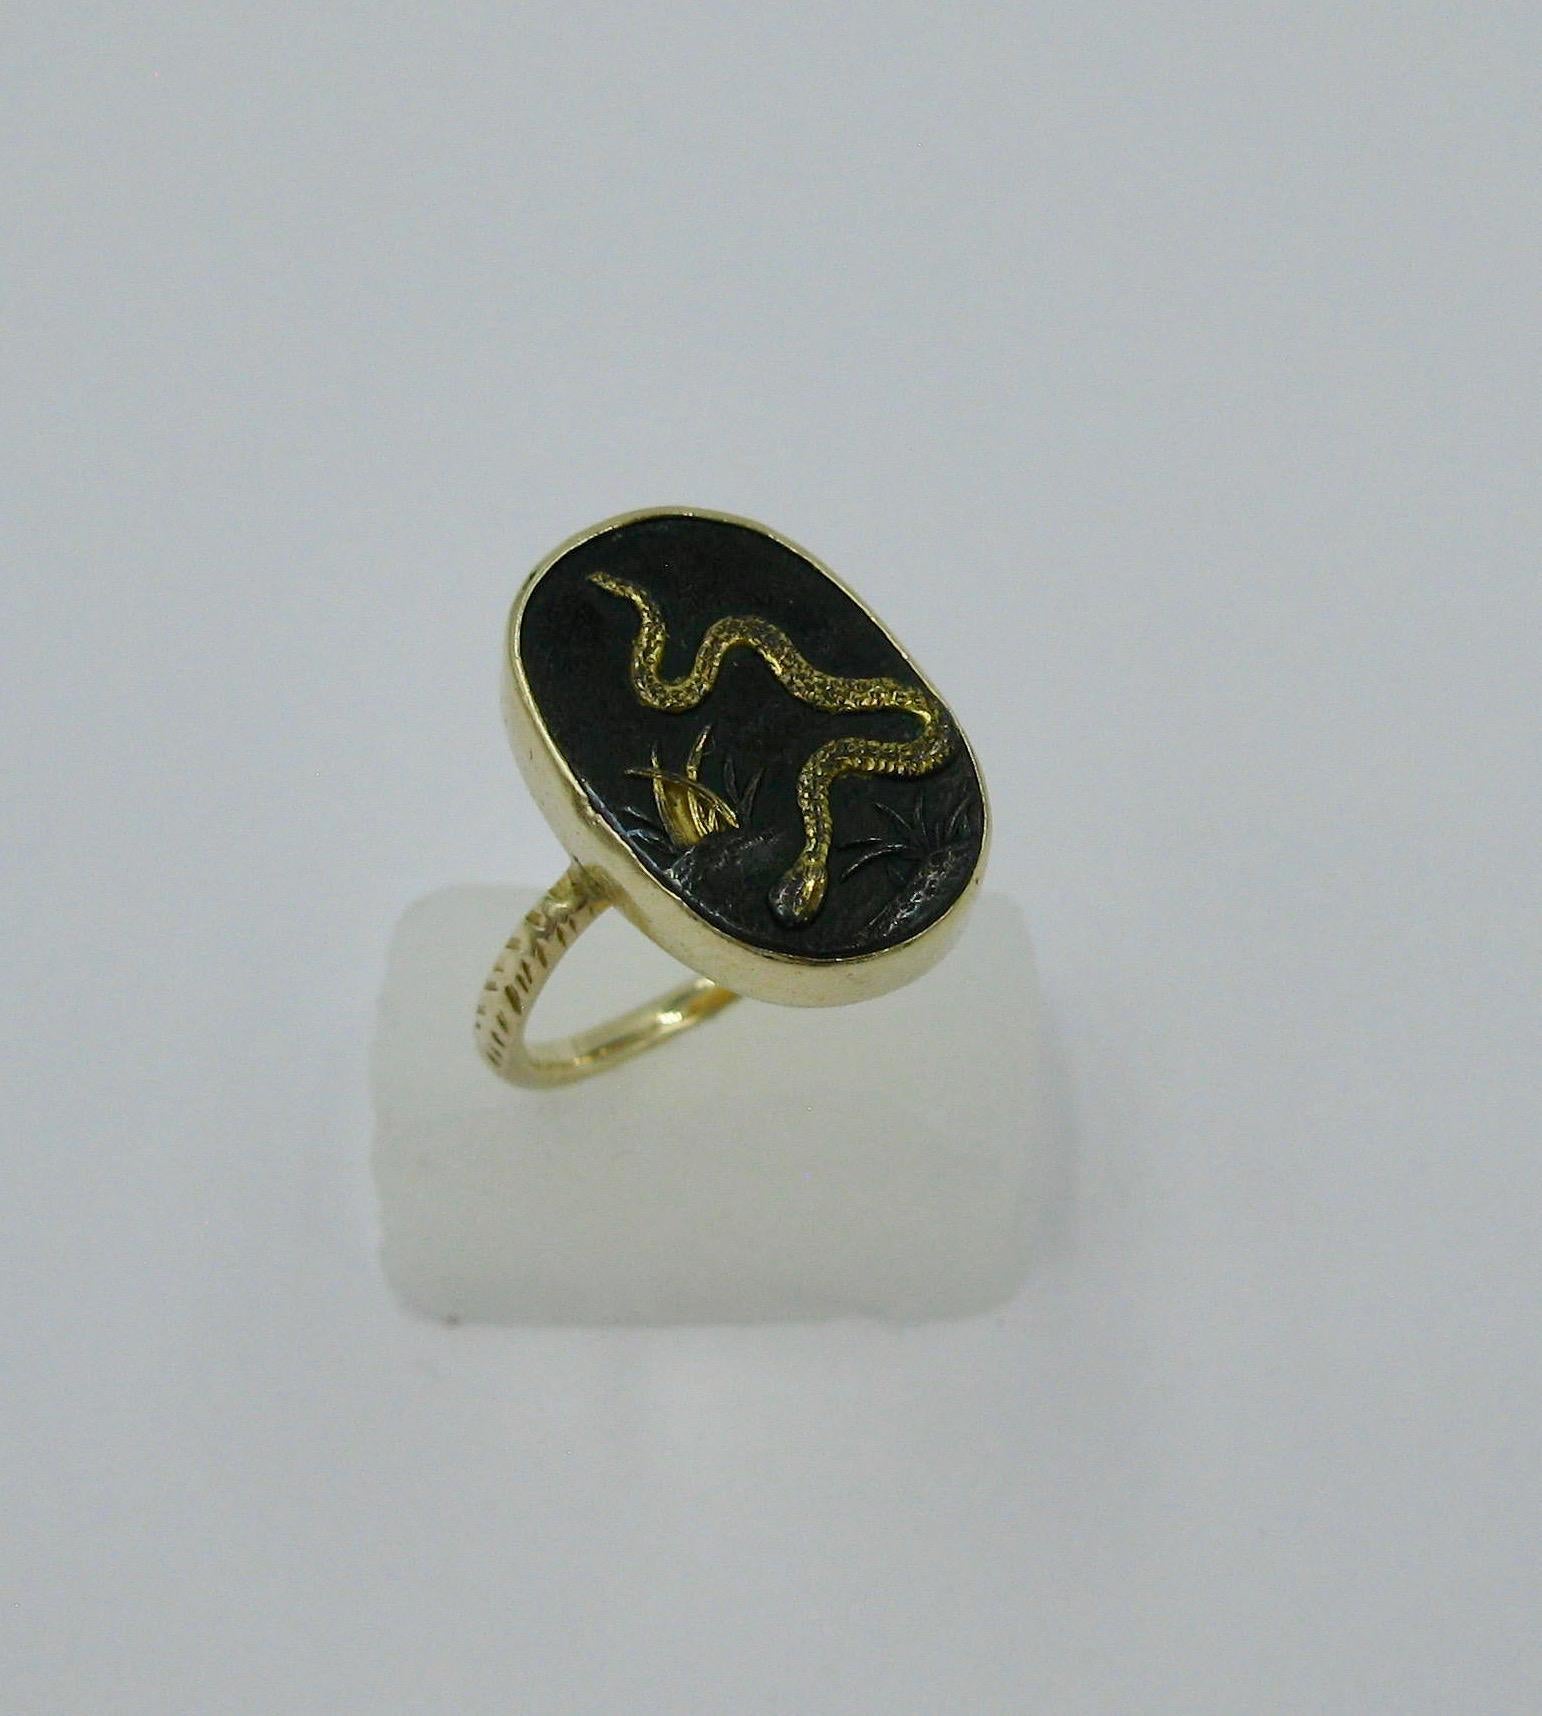 This is a very rare ring depicting a snake traveling through the grass in the historic Japanese art form of Shakudo, in 14 Karat Gold.   The Shakudo pieces originated in the Samurai period in Japan and were created by esteemed artists who made